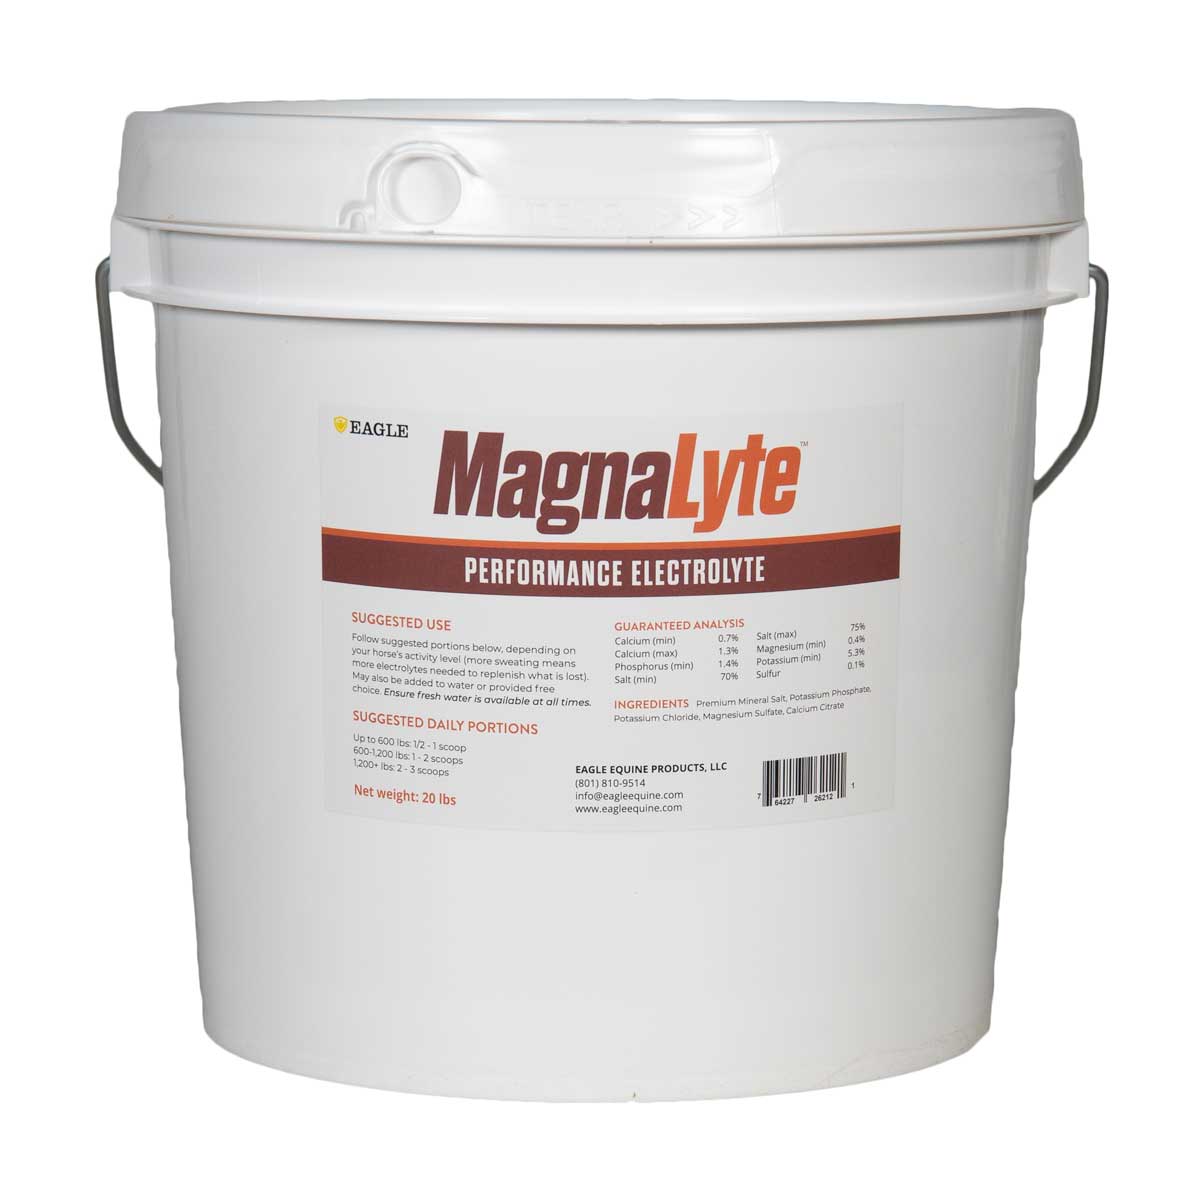 MagnaLyte Performance Electrolyte for horses by Eagle Equine Products